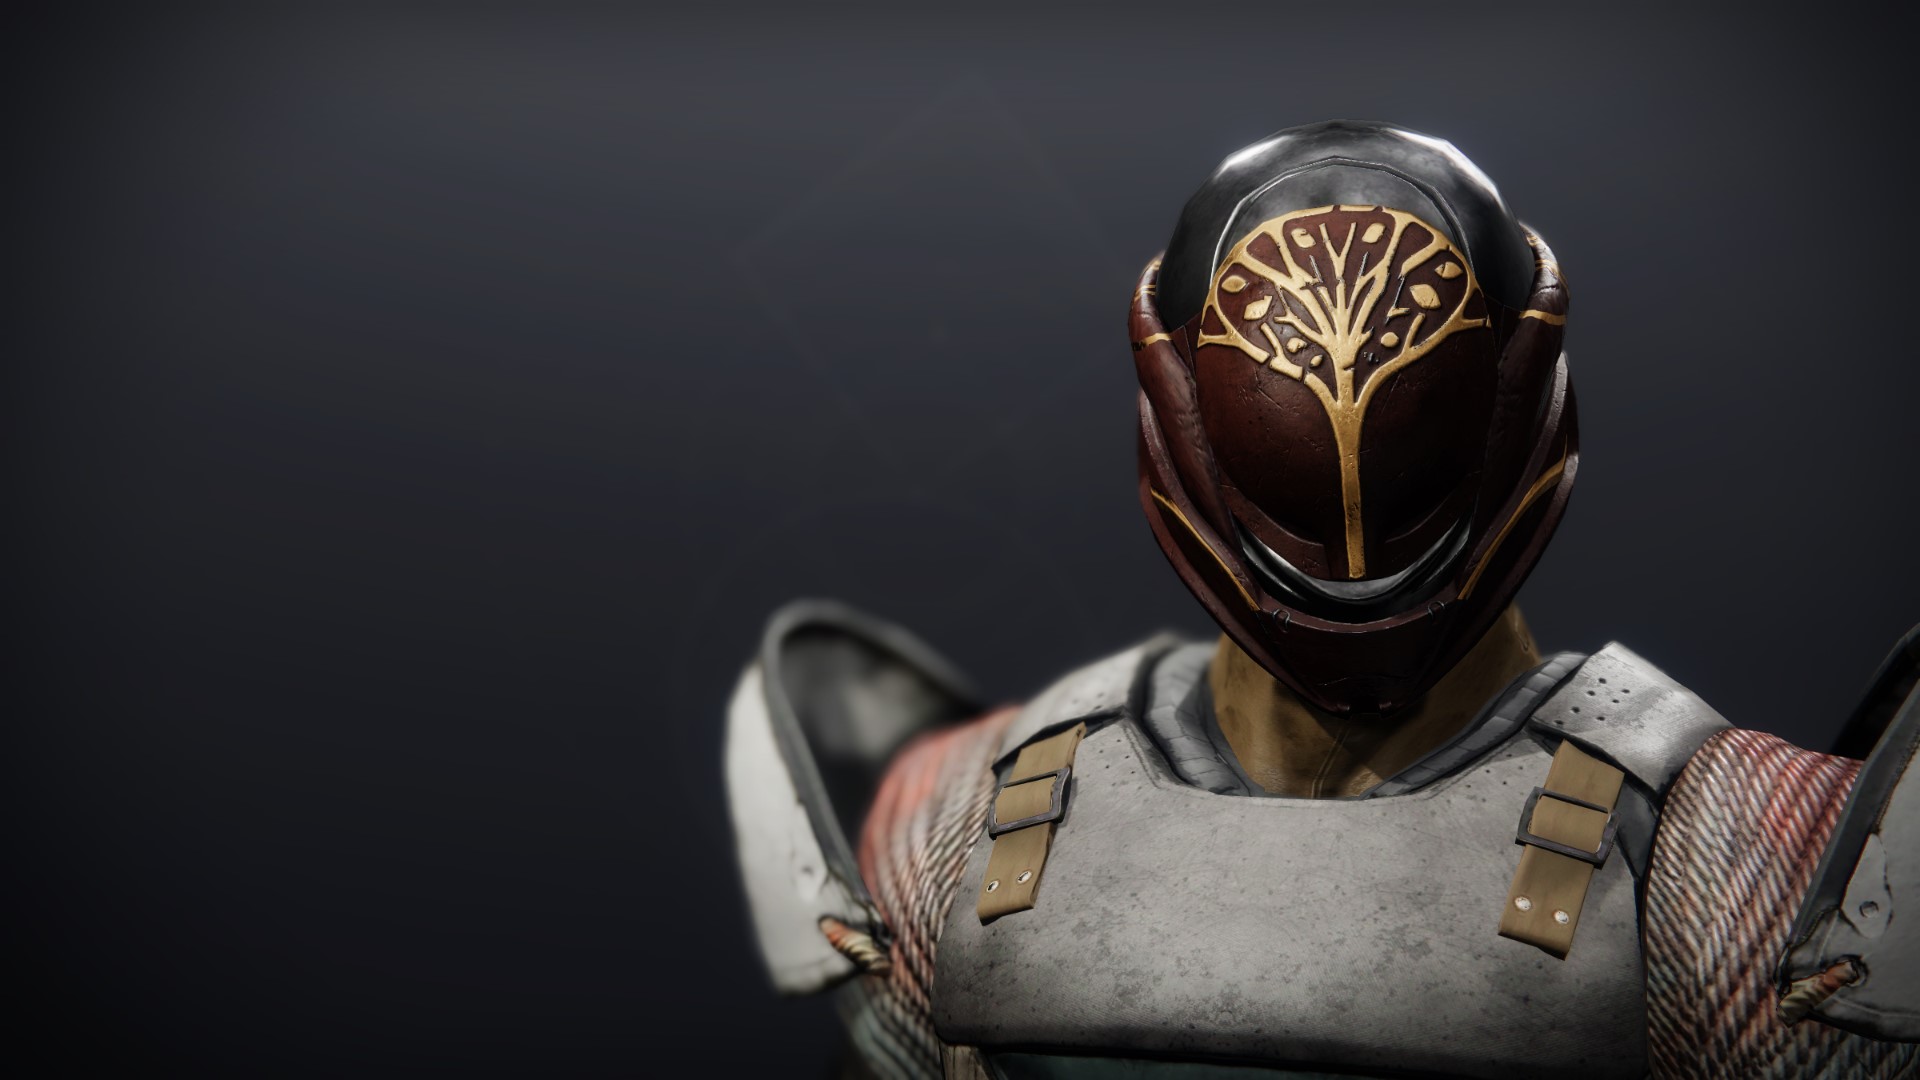 An in-game render of the Iron Fellowship Helm.